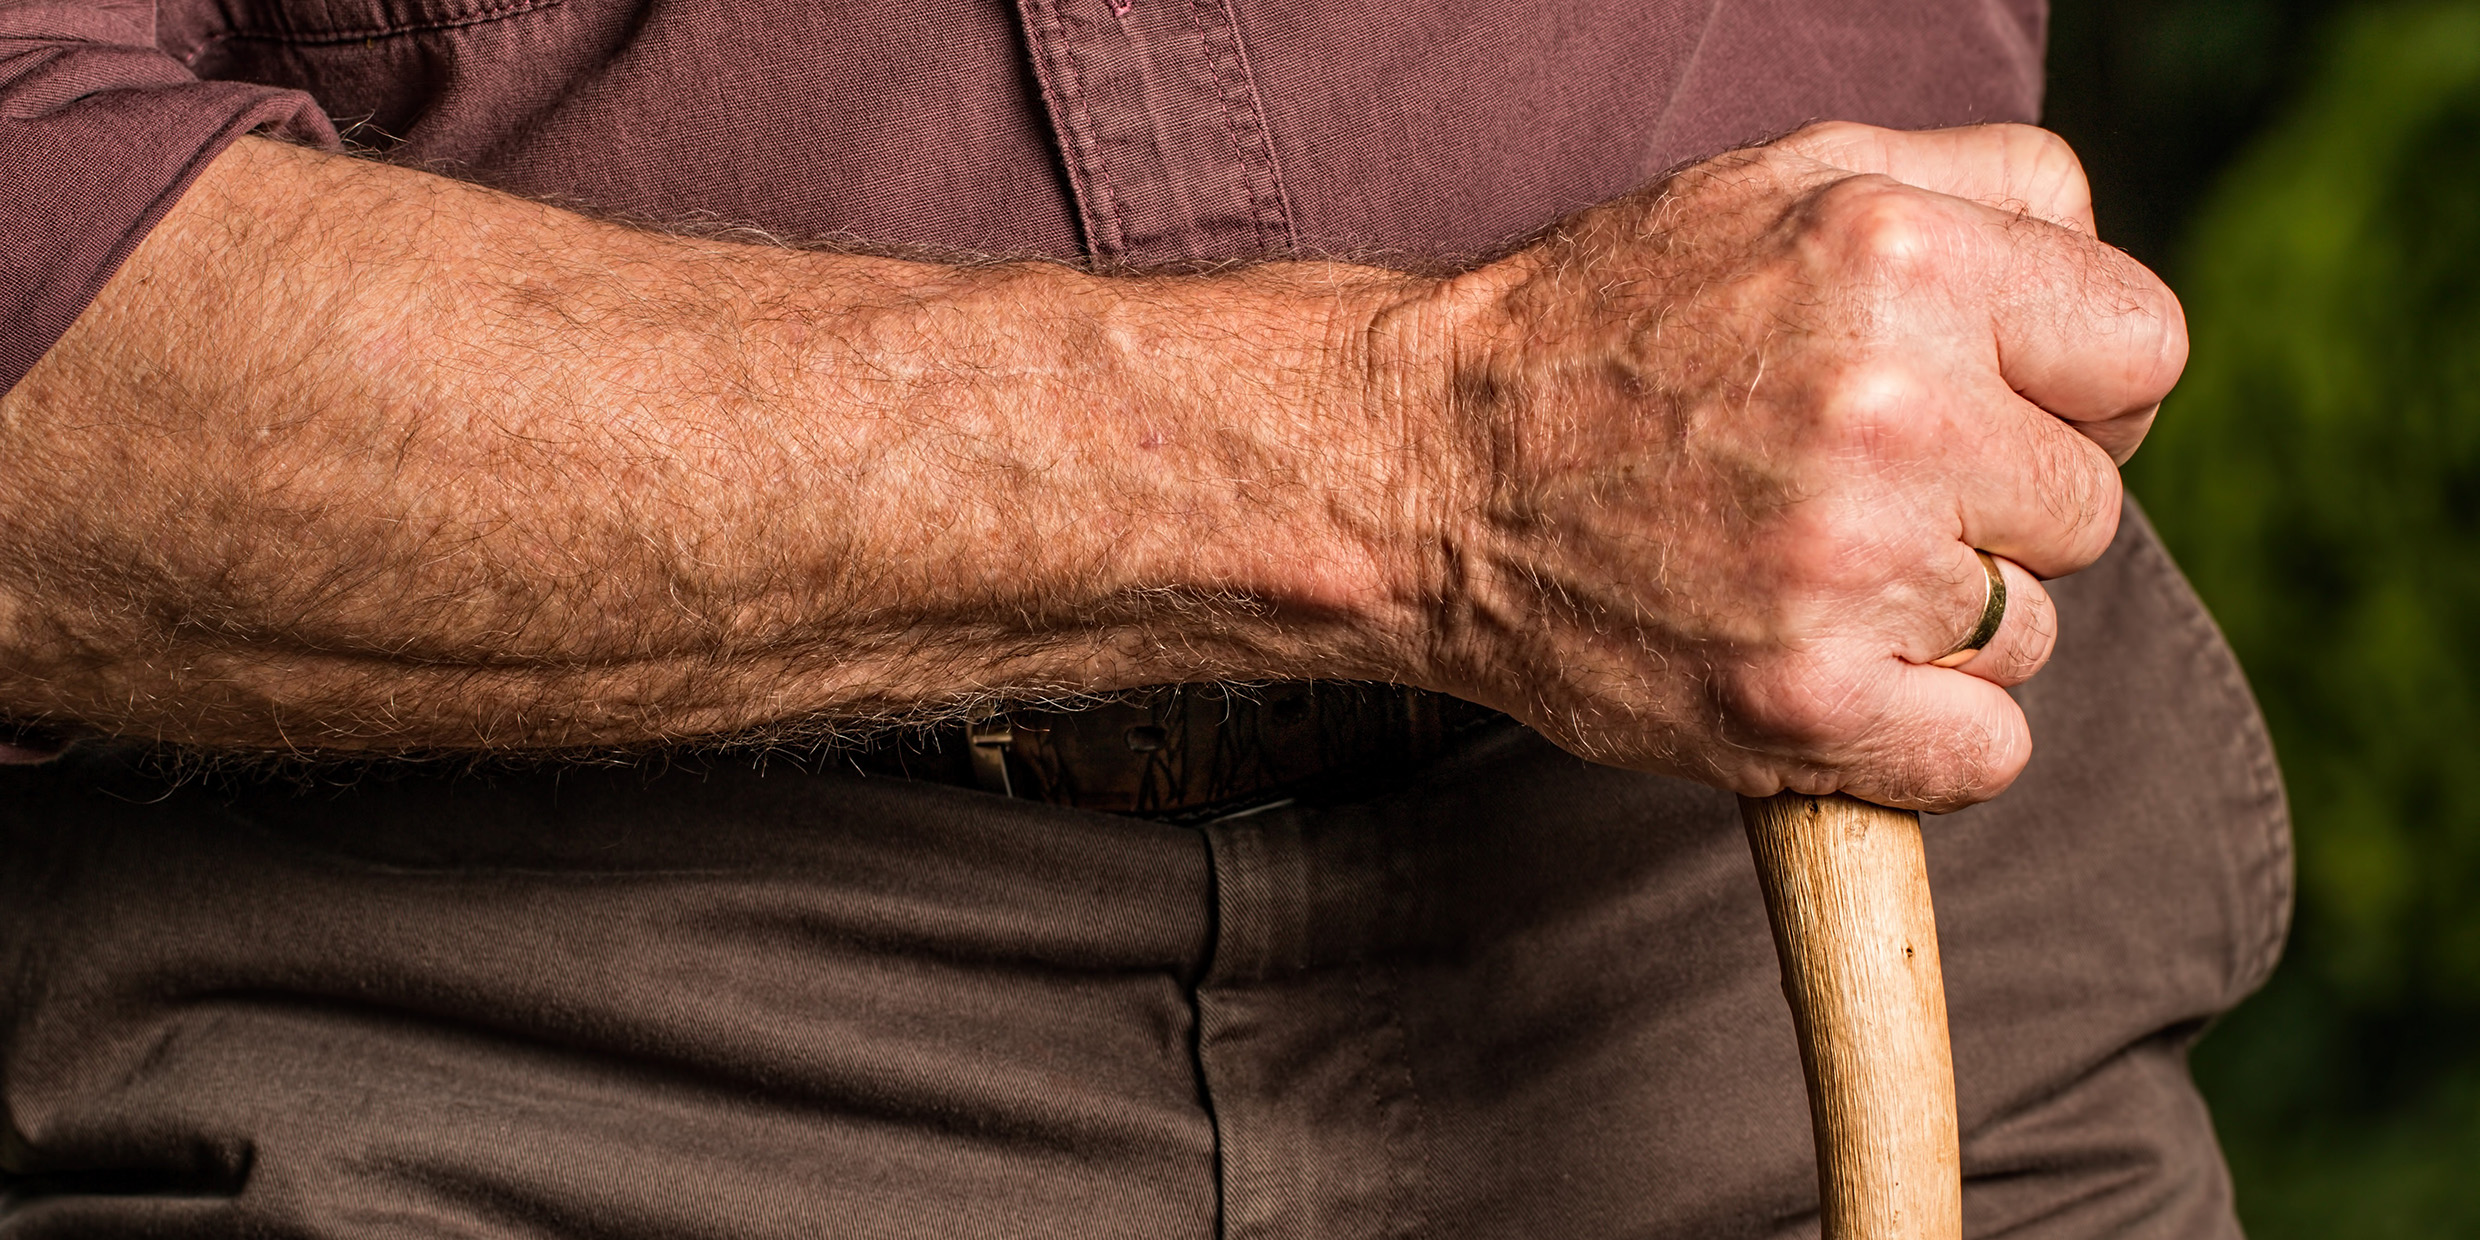 Close up image of an old man's hand holding a cane